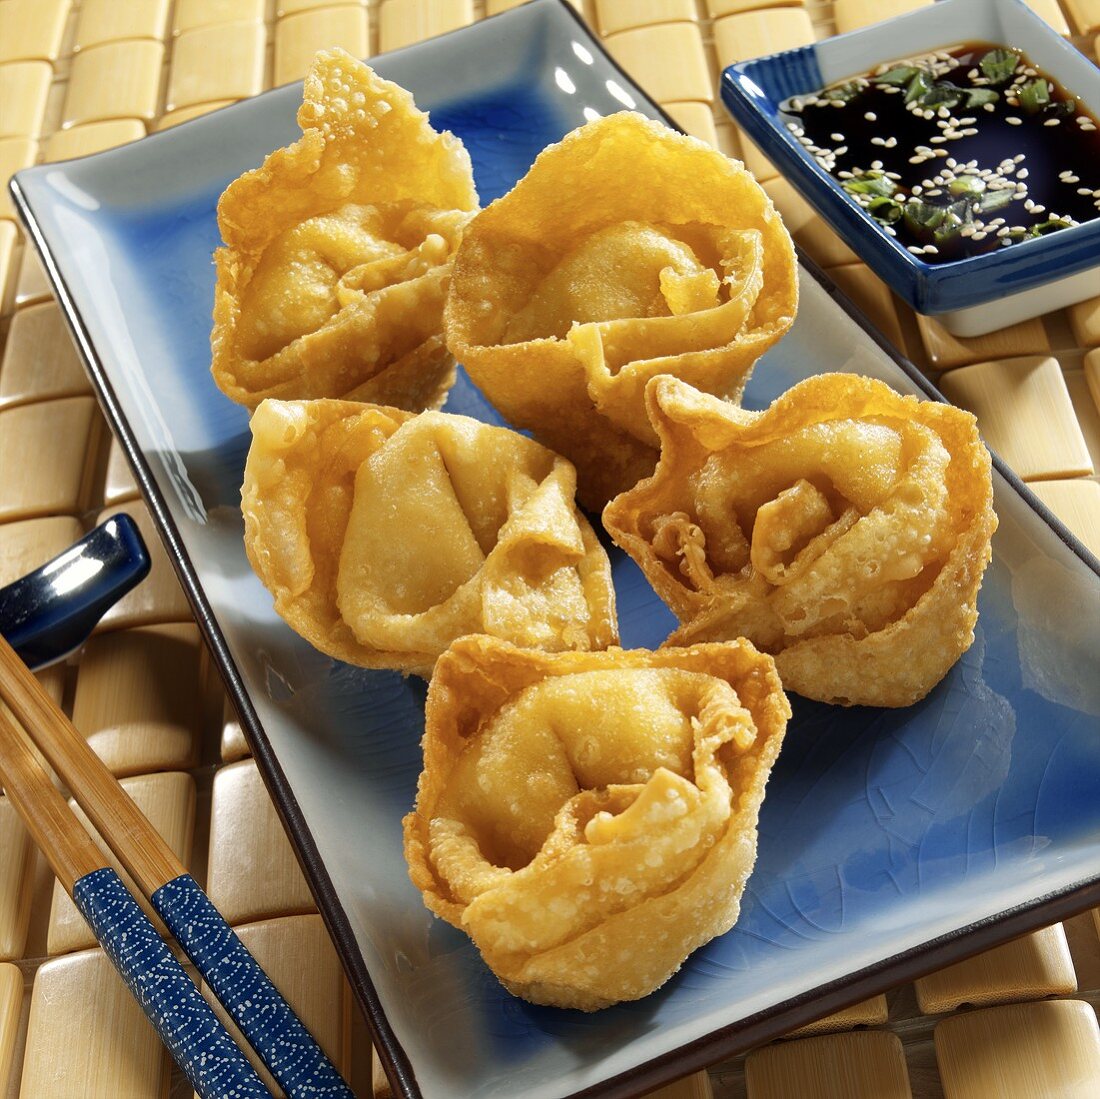 Deep-fried won ton parcels with soy sauce (Crab Rangoon)